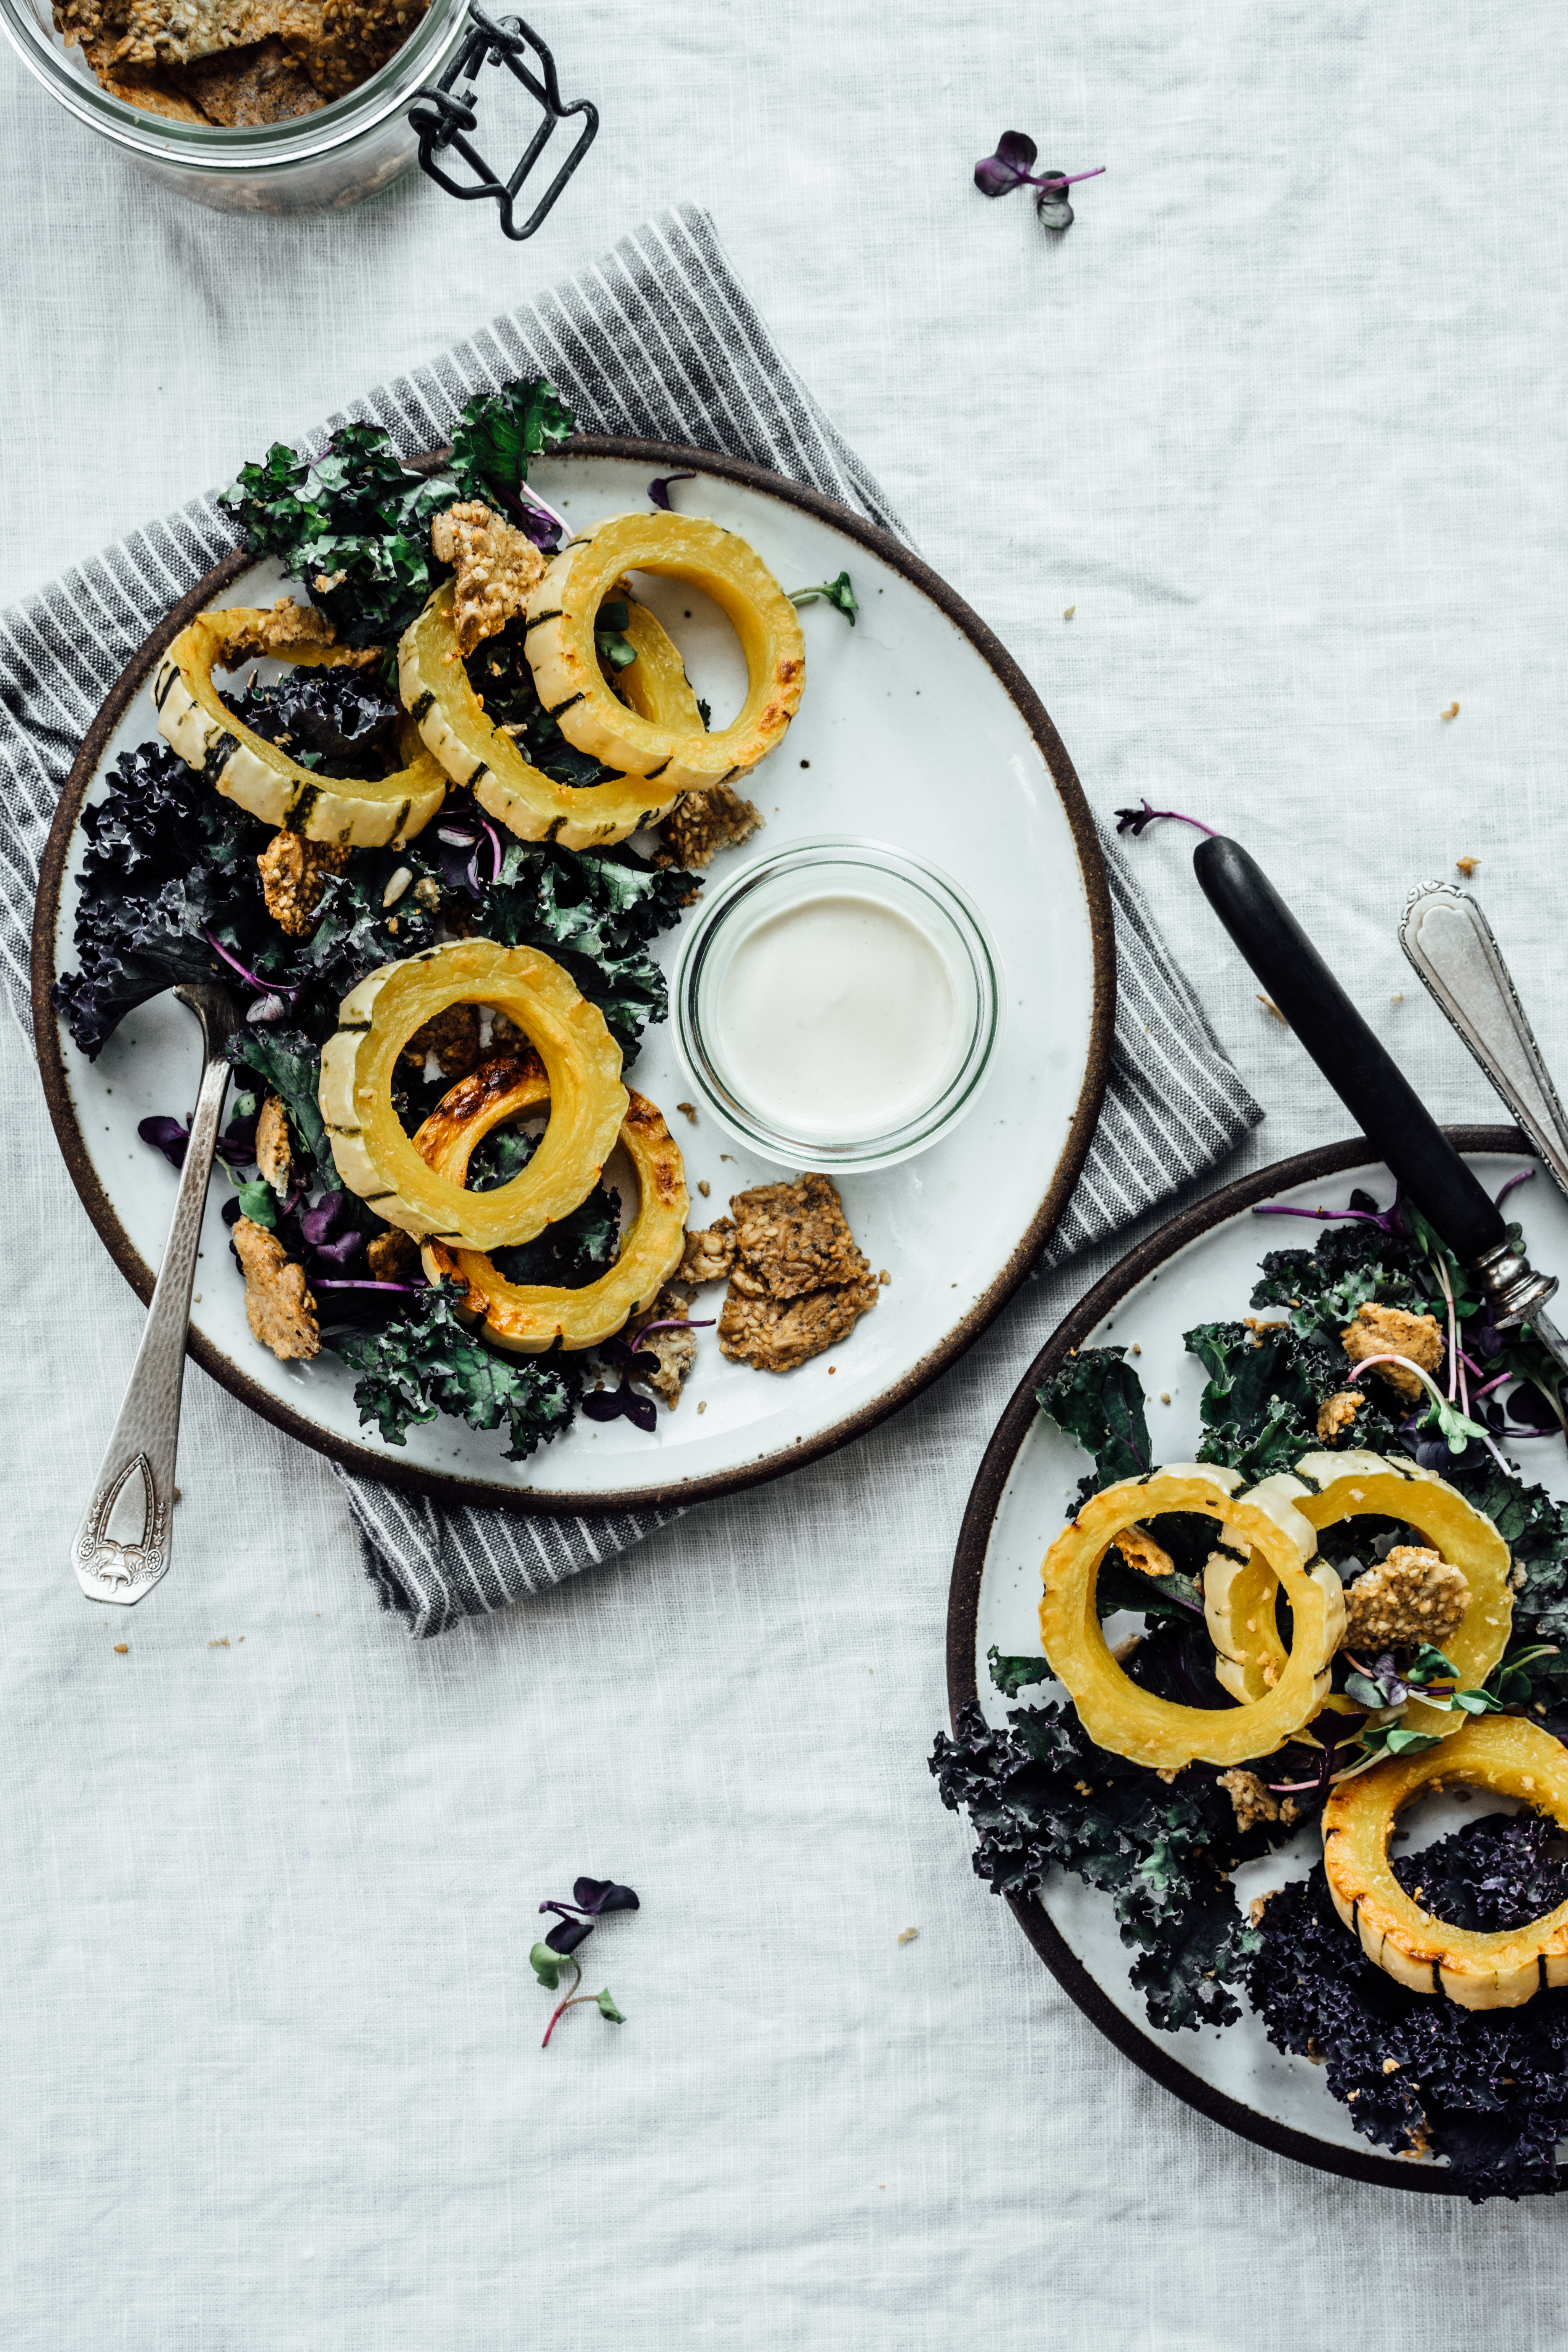 Roasted Squash Salad with Sesame Crisps and Creamy Miso Dressing | TENDING the TABLE